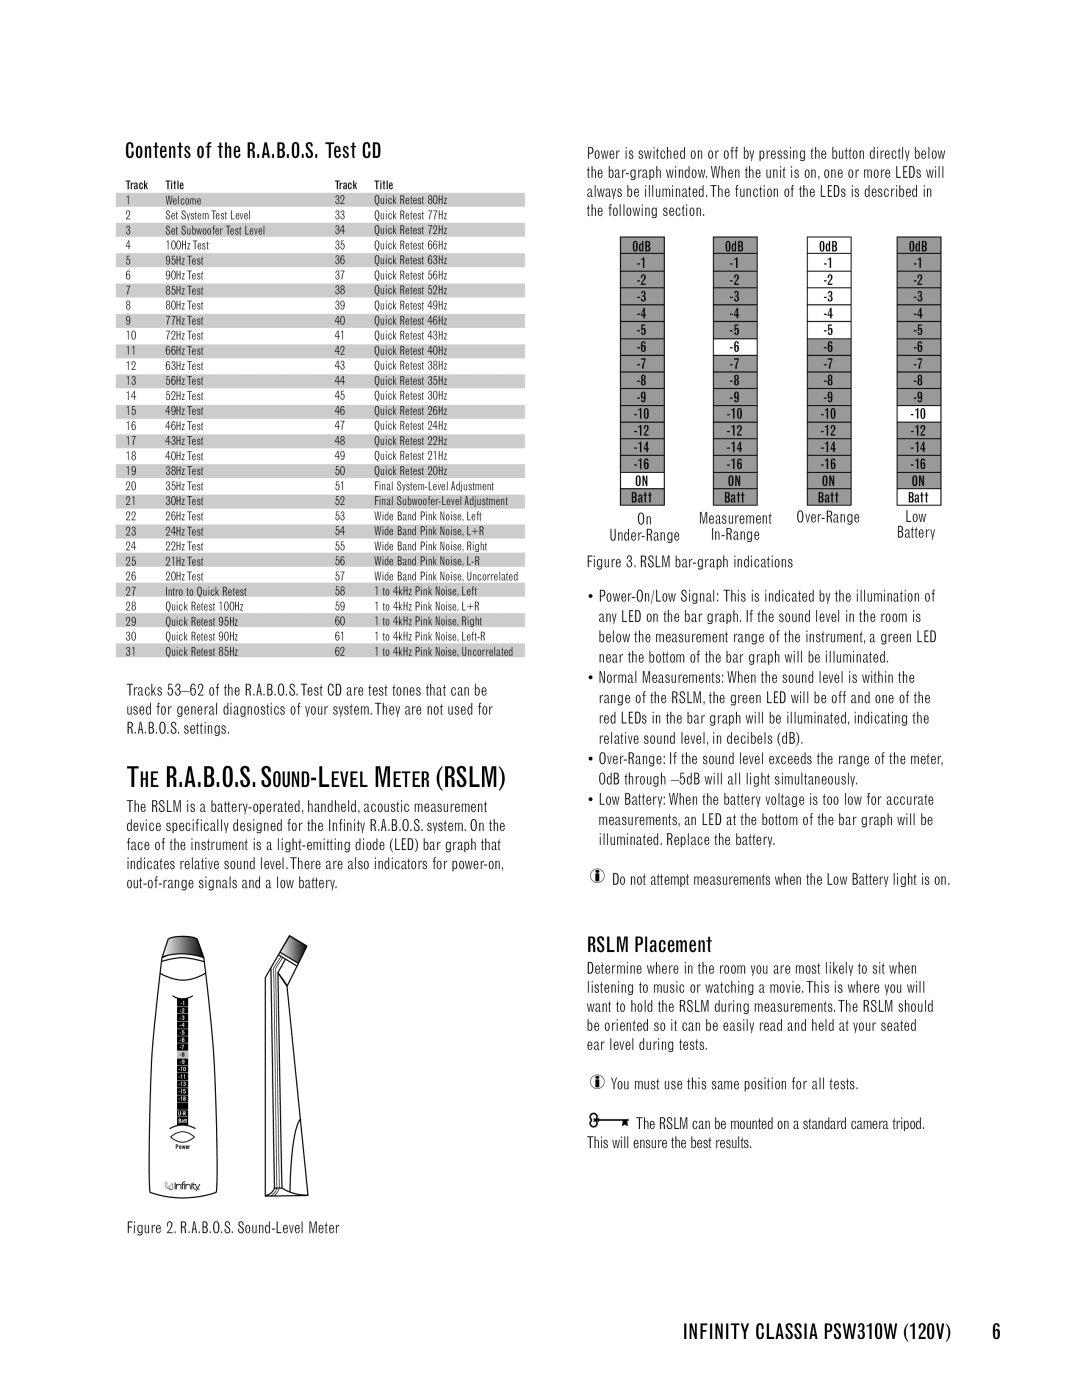 Infinity PSW310W manual The R.A.B.O.S. Sound-Level Meter Rslm, Contents of the R.A.B.O.S. Test CD, RSLM Placement 